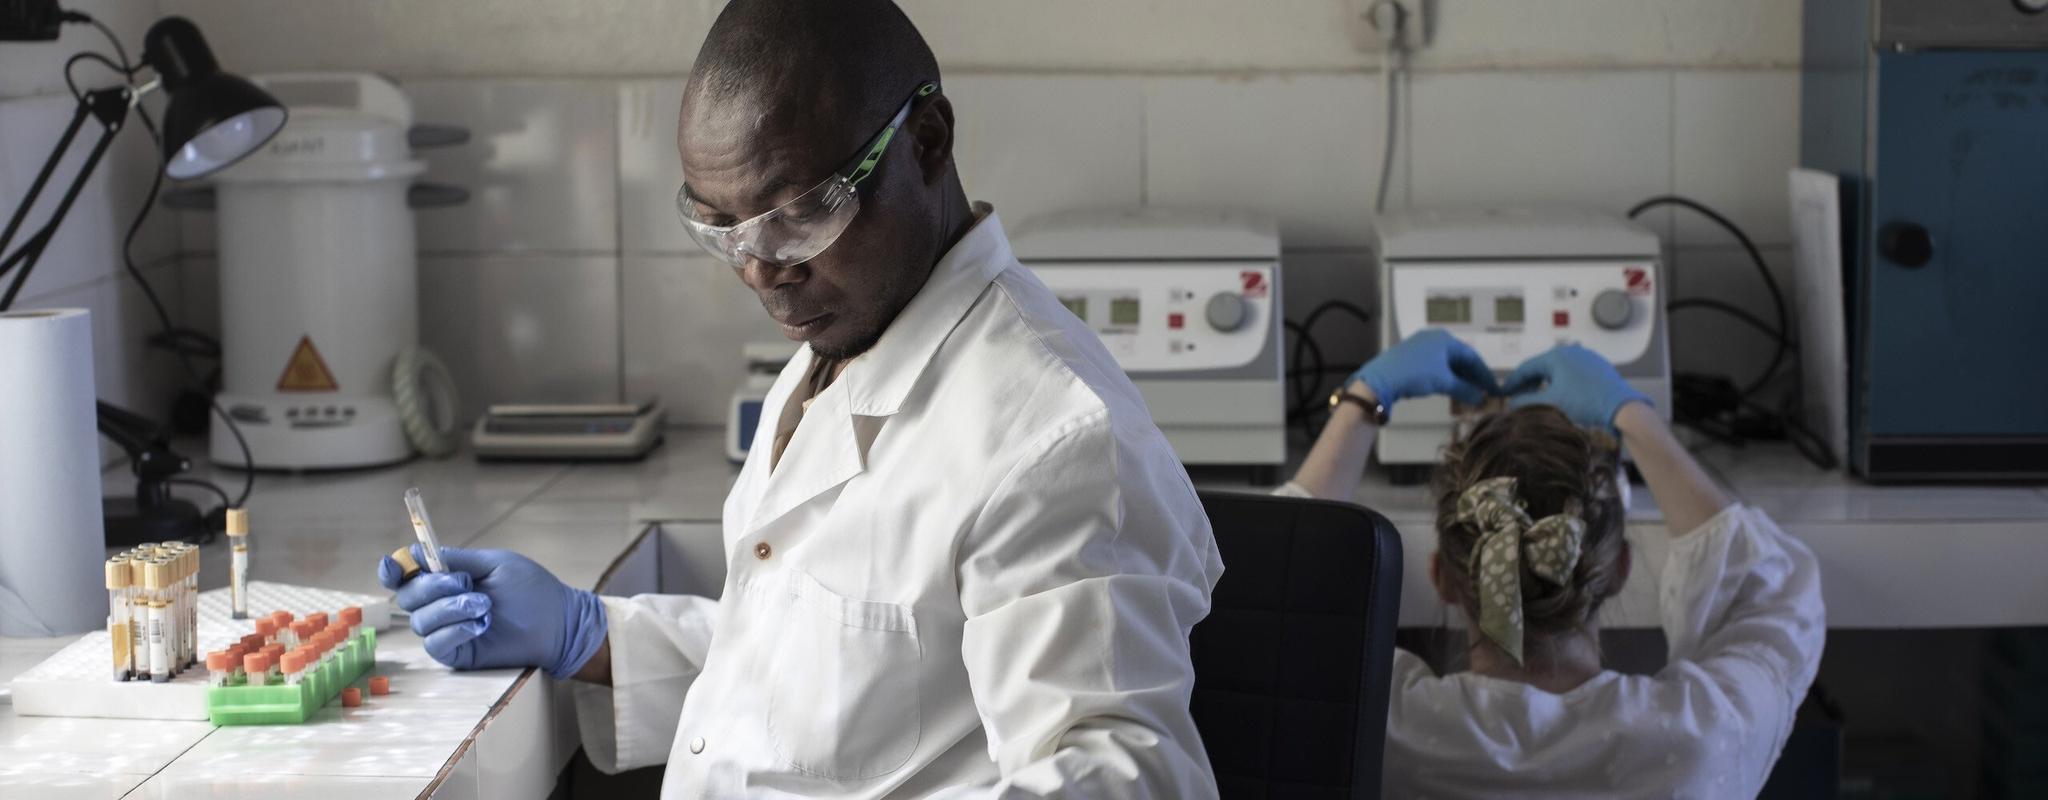 A healthcare worker analyses samples in a hospital laboratory.